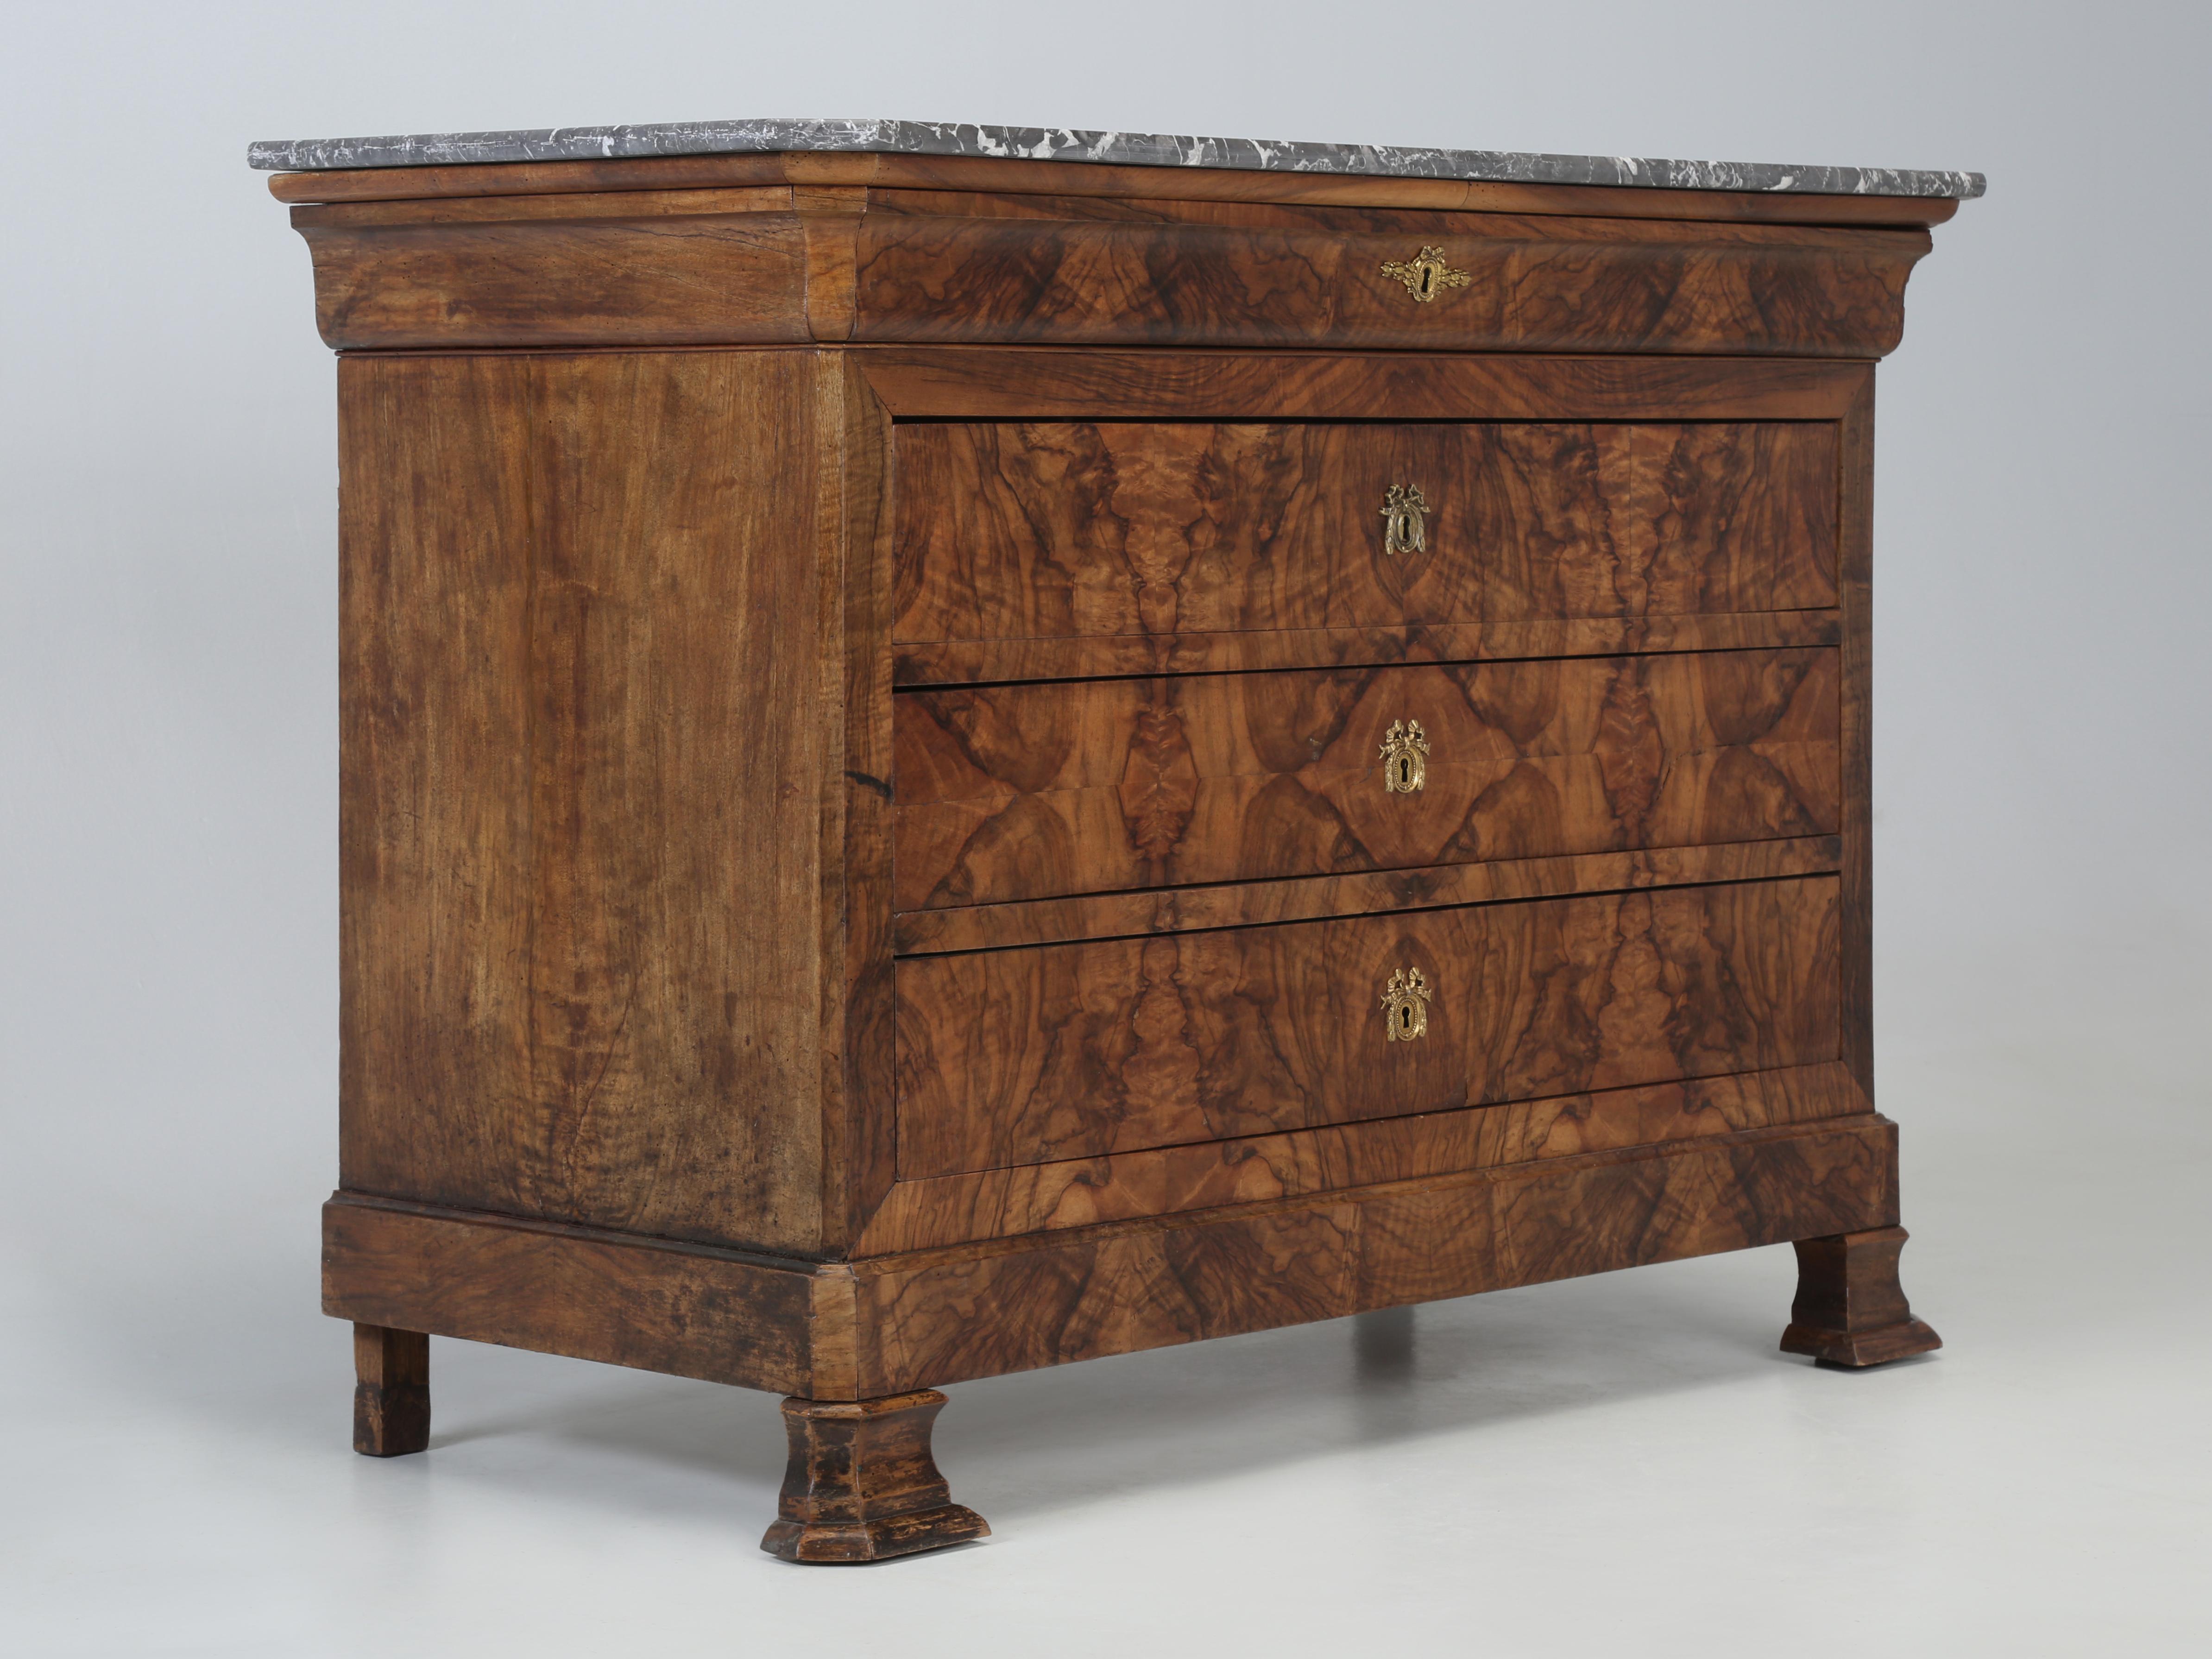 Hand-Crafted Antique French Commode Louis Philippe Style Burl Walnut Book-Matched Marble Top For Sale